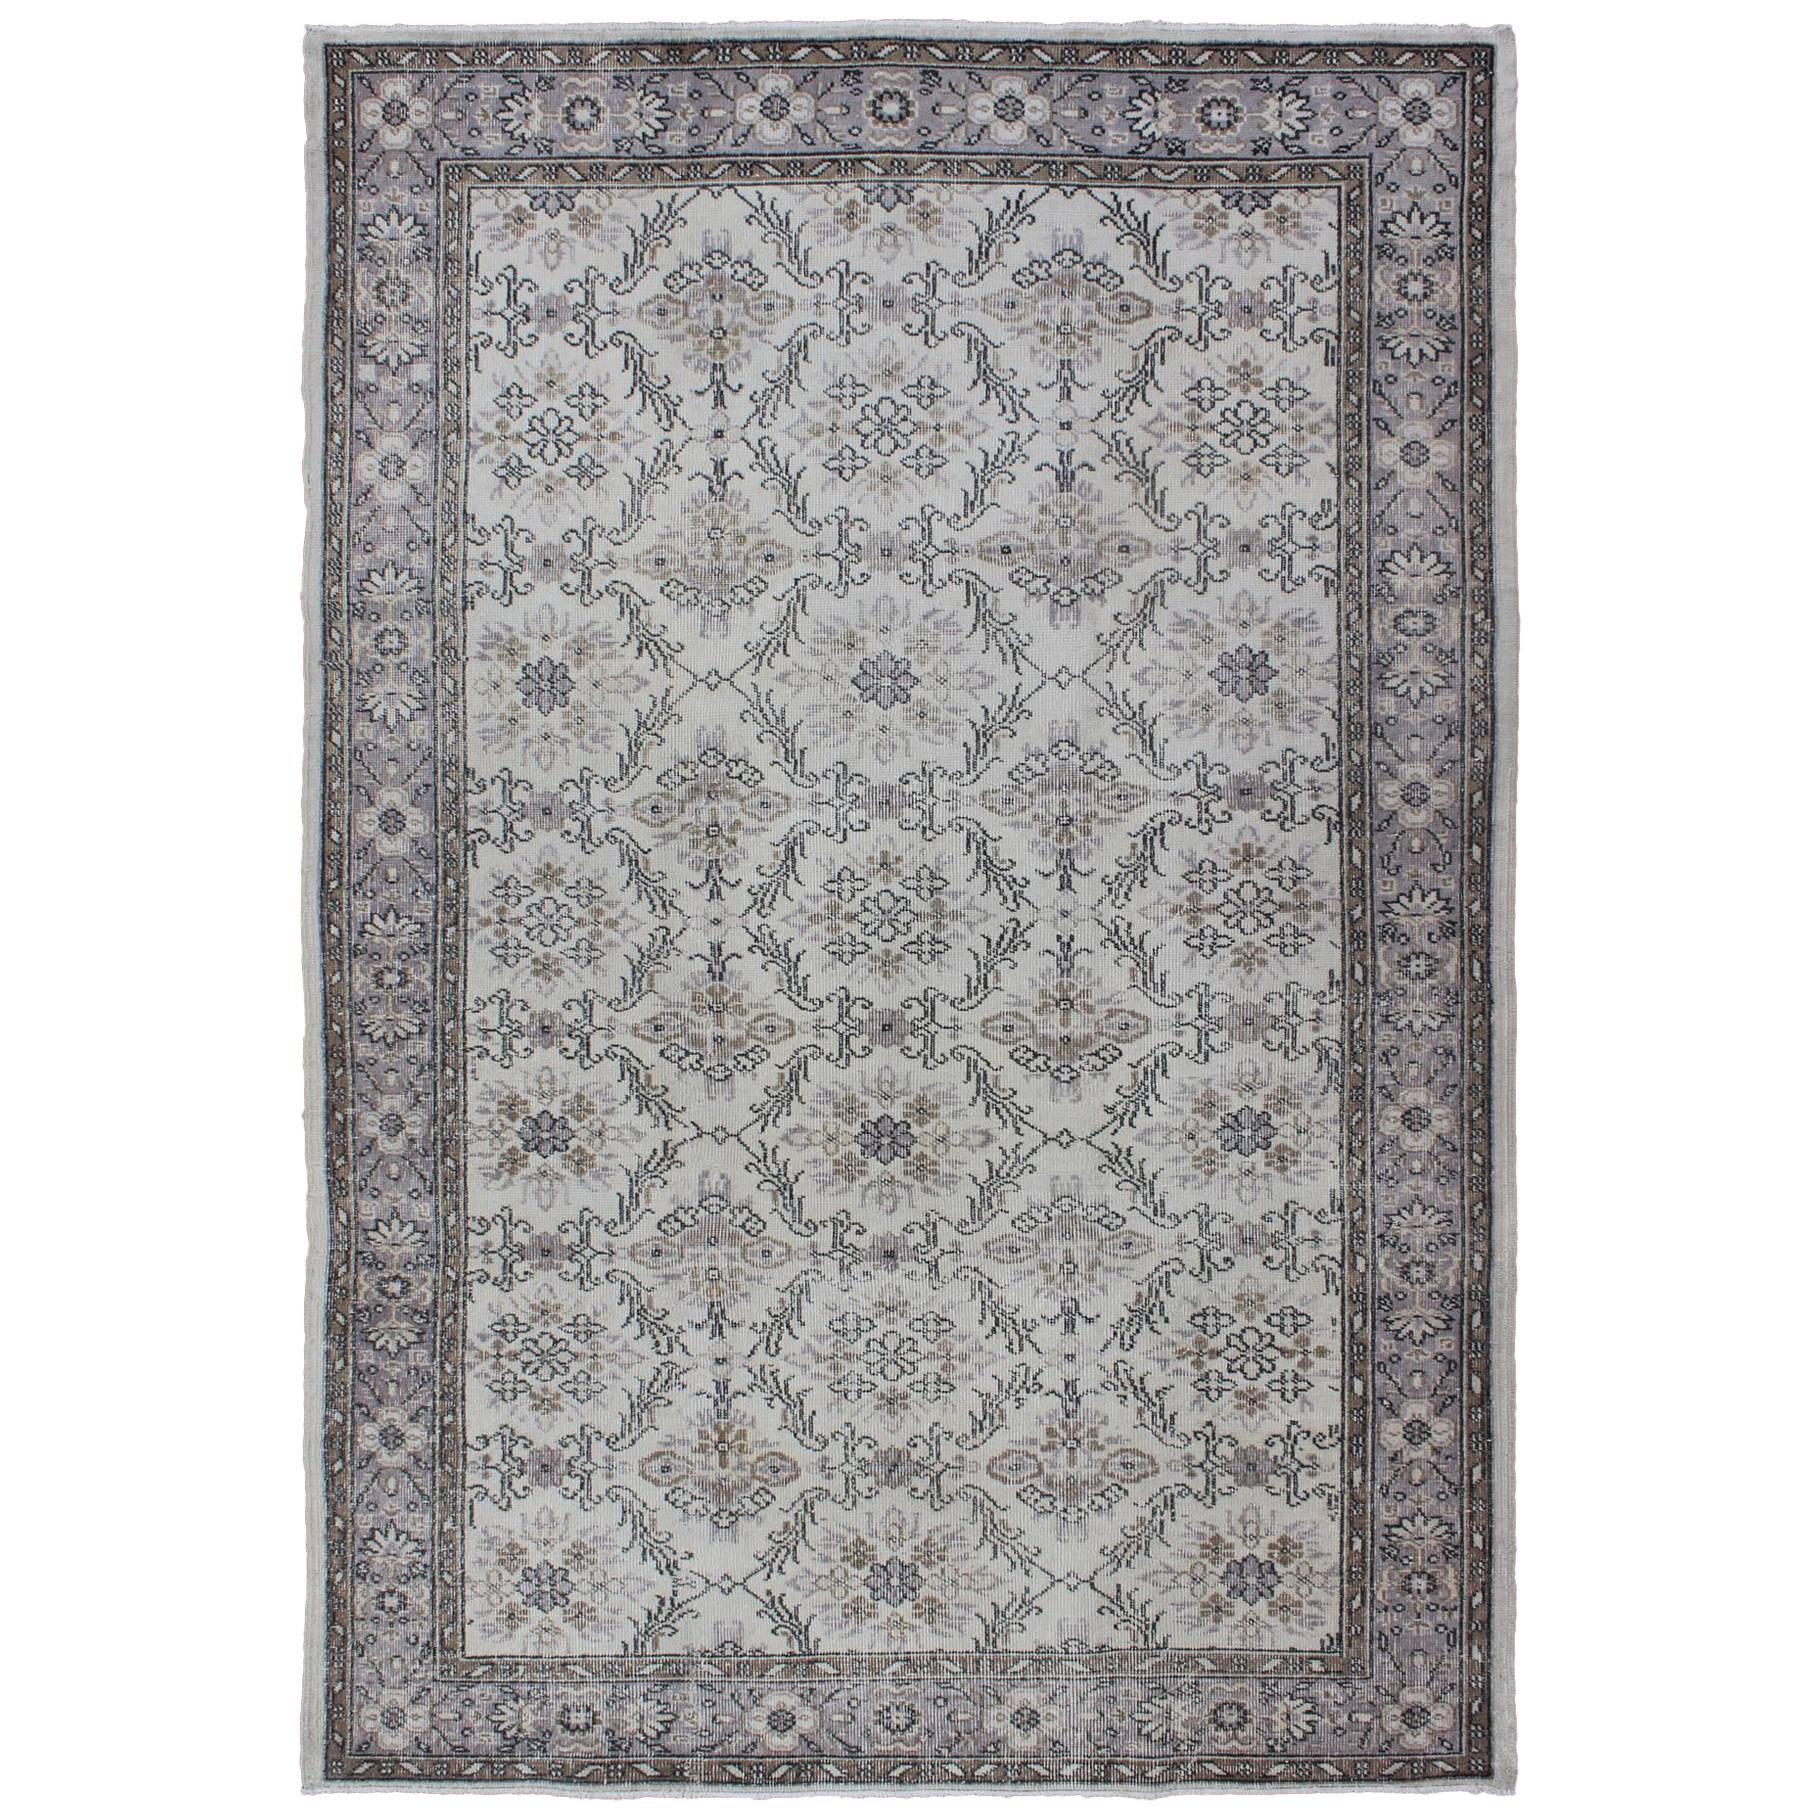 Midcentury Gray-Colored Turkish Oushak Rug with Stylized Floral Design